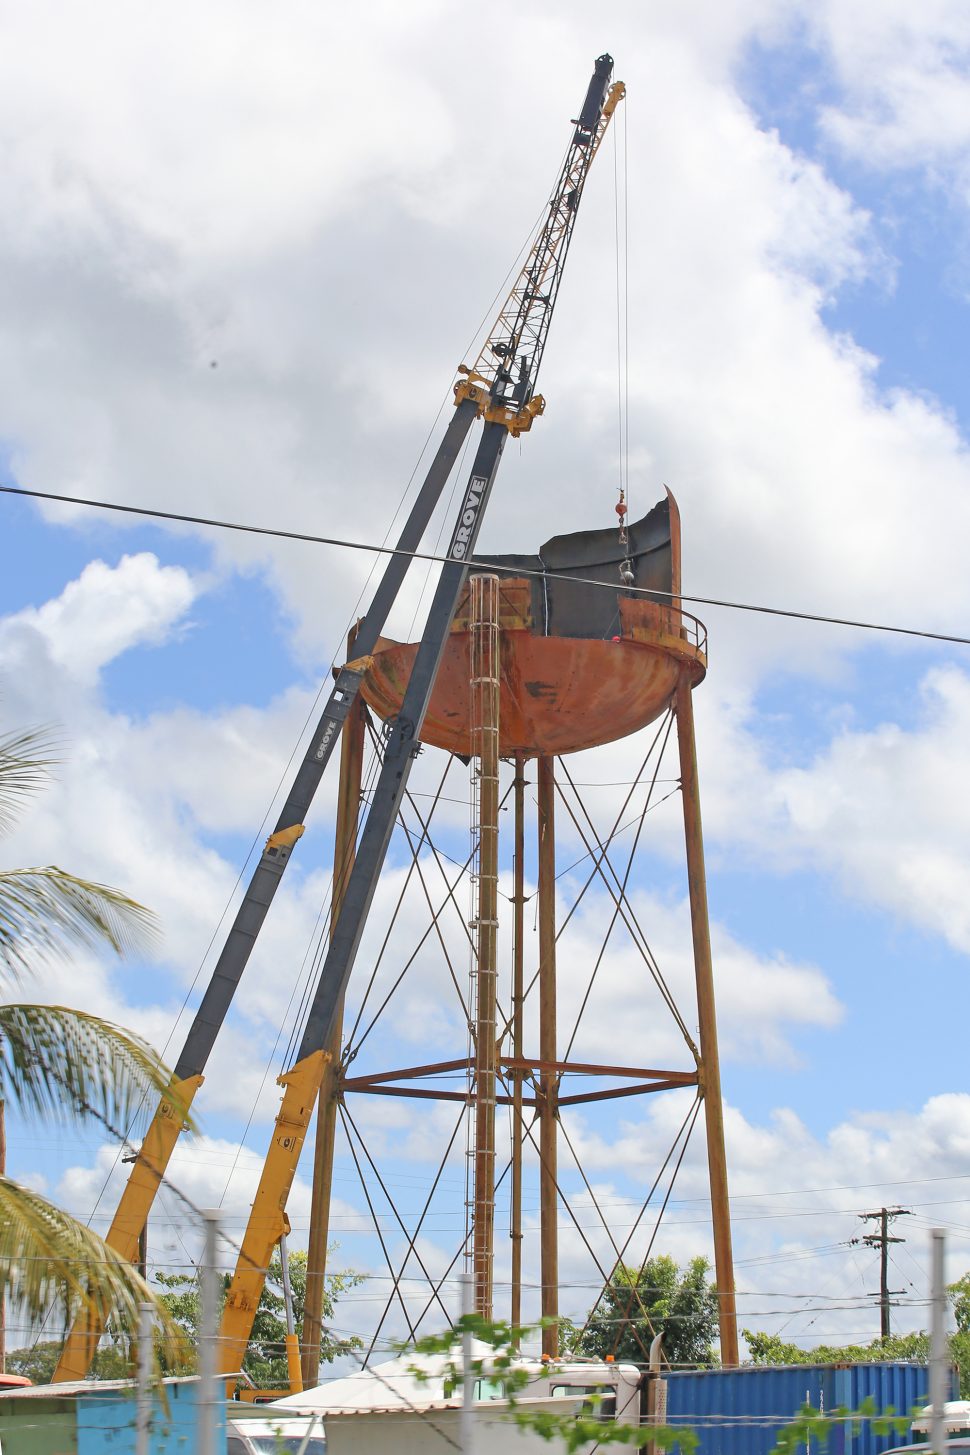 This aged water storage tank at Last Street, Herstelling, East Bank Demerara was being cut apart on Monday morning.  